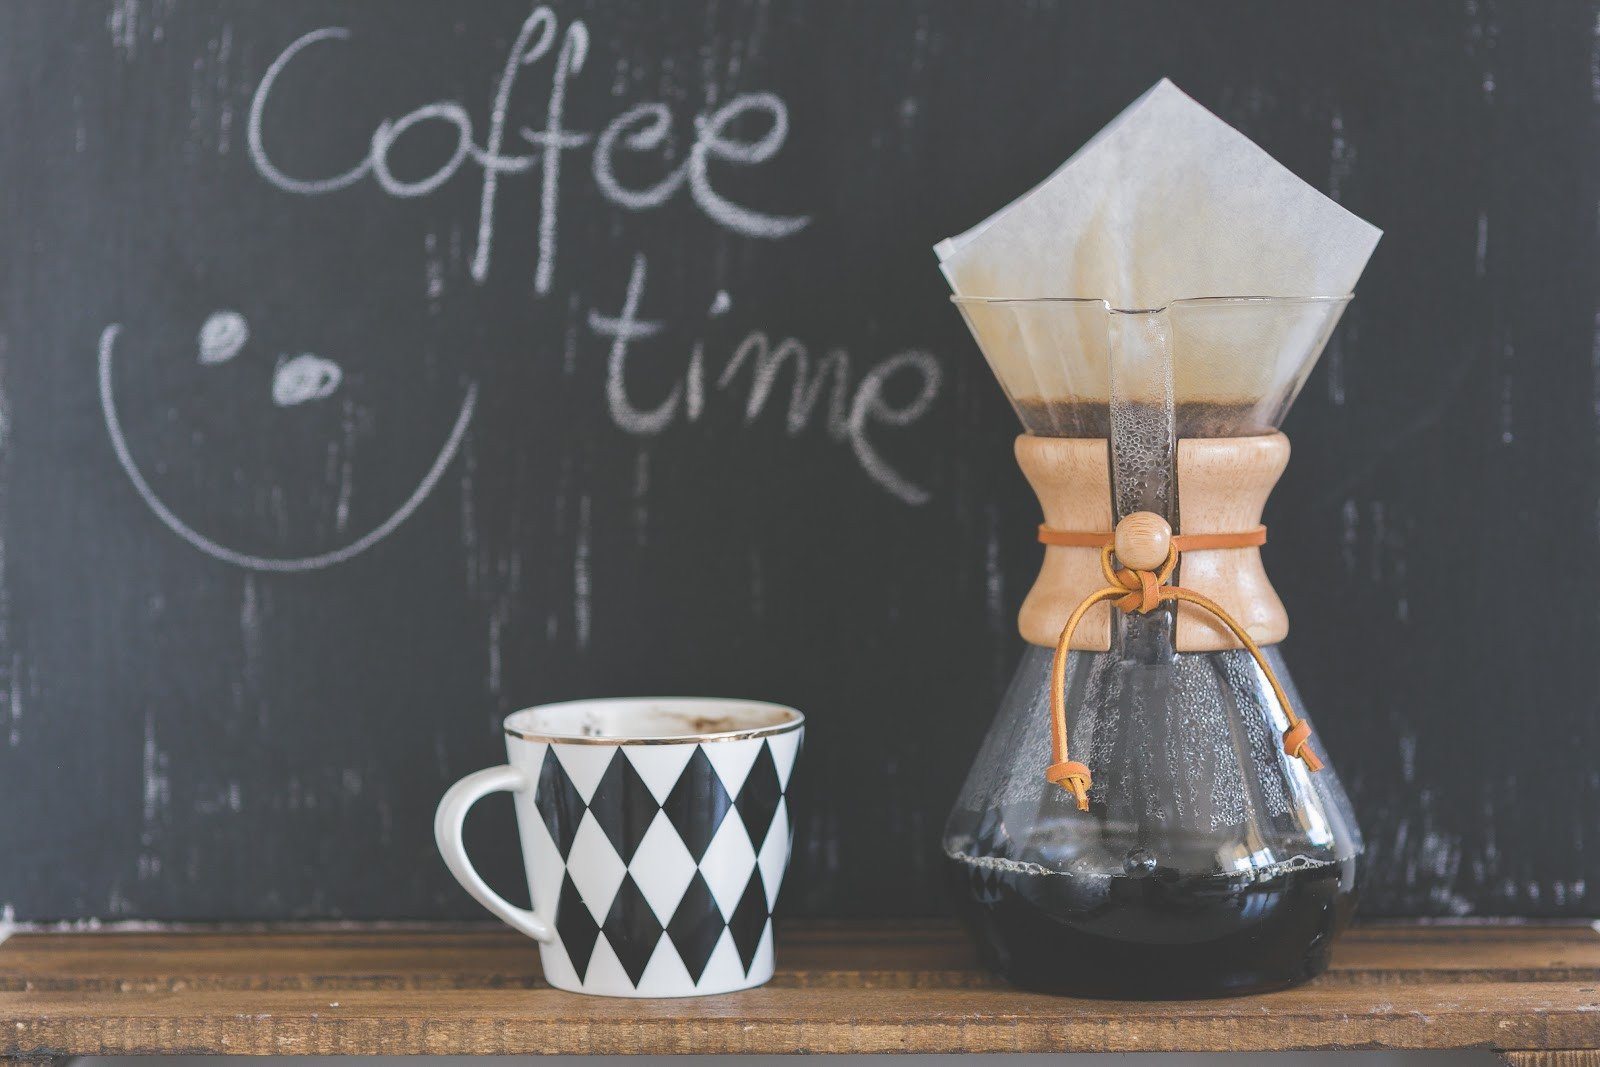 Should you consider switching up your coffee game?